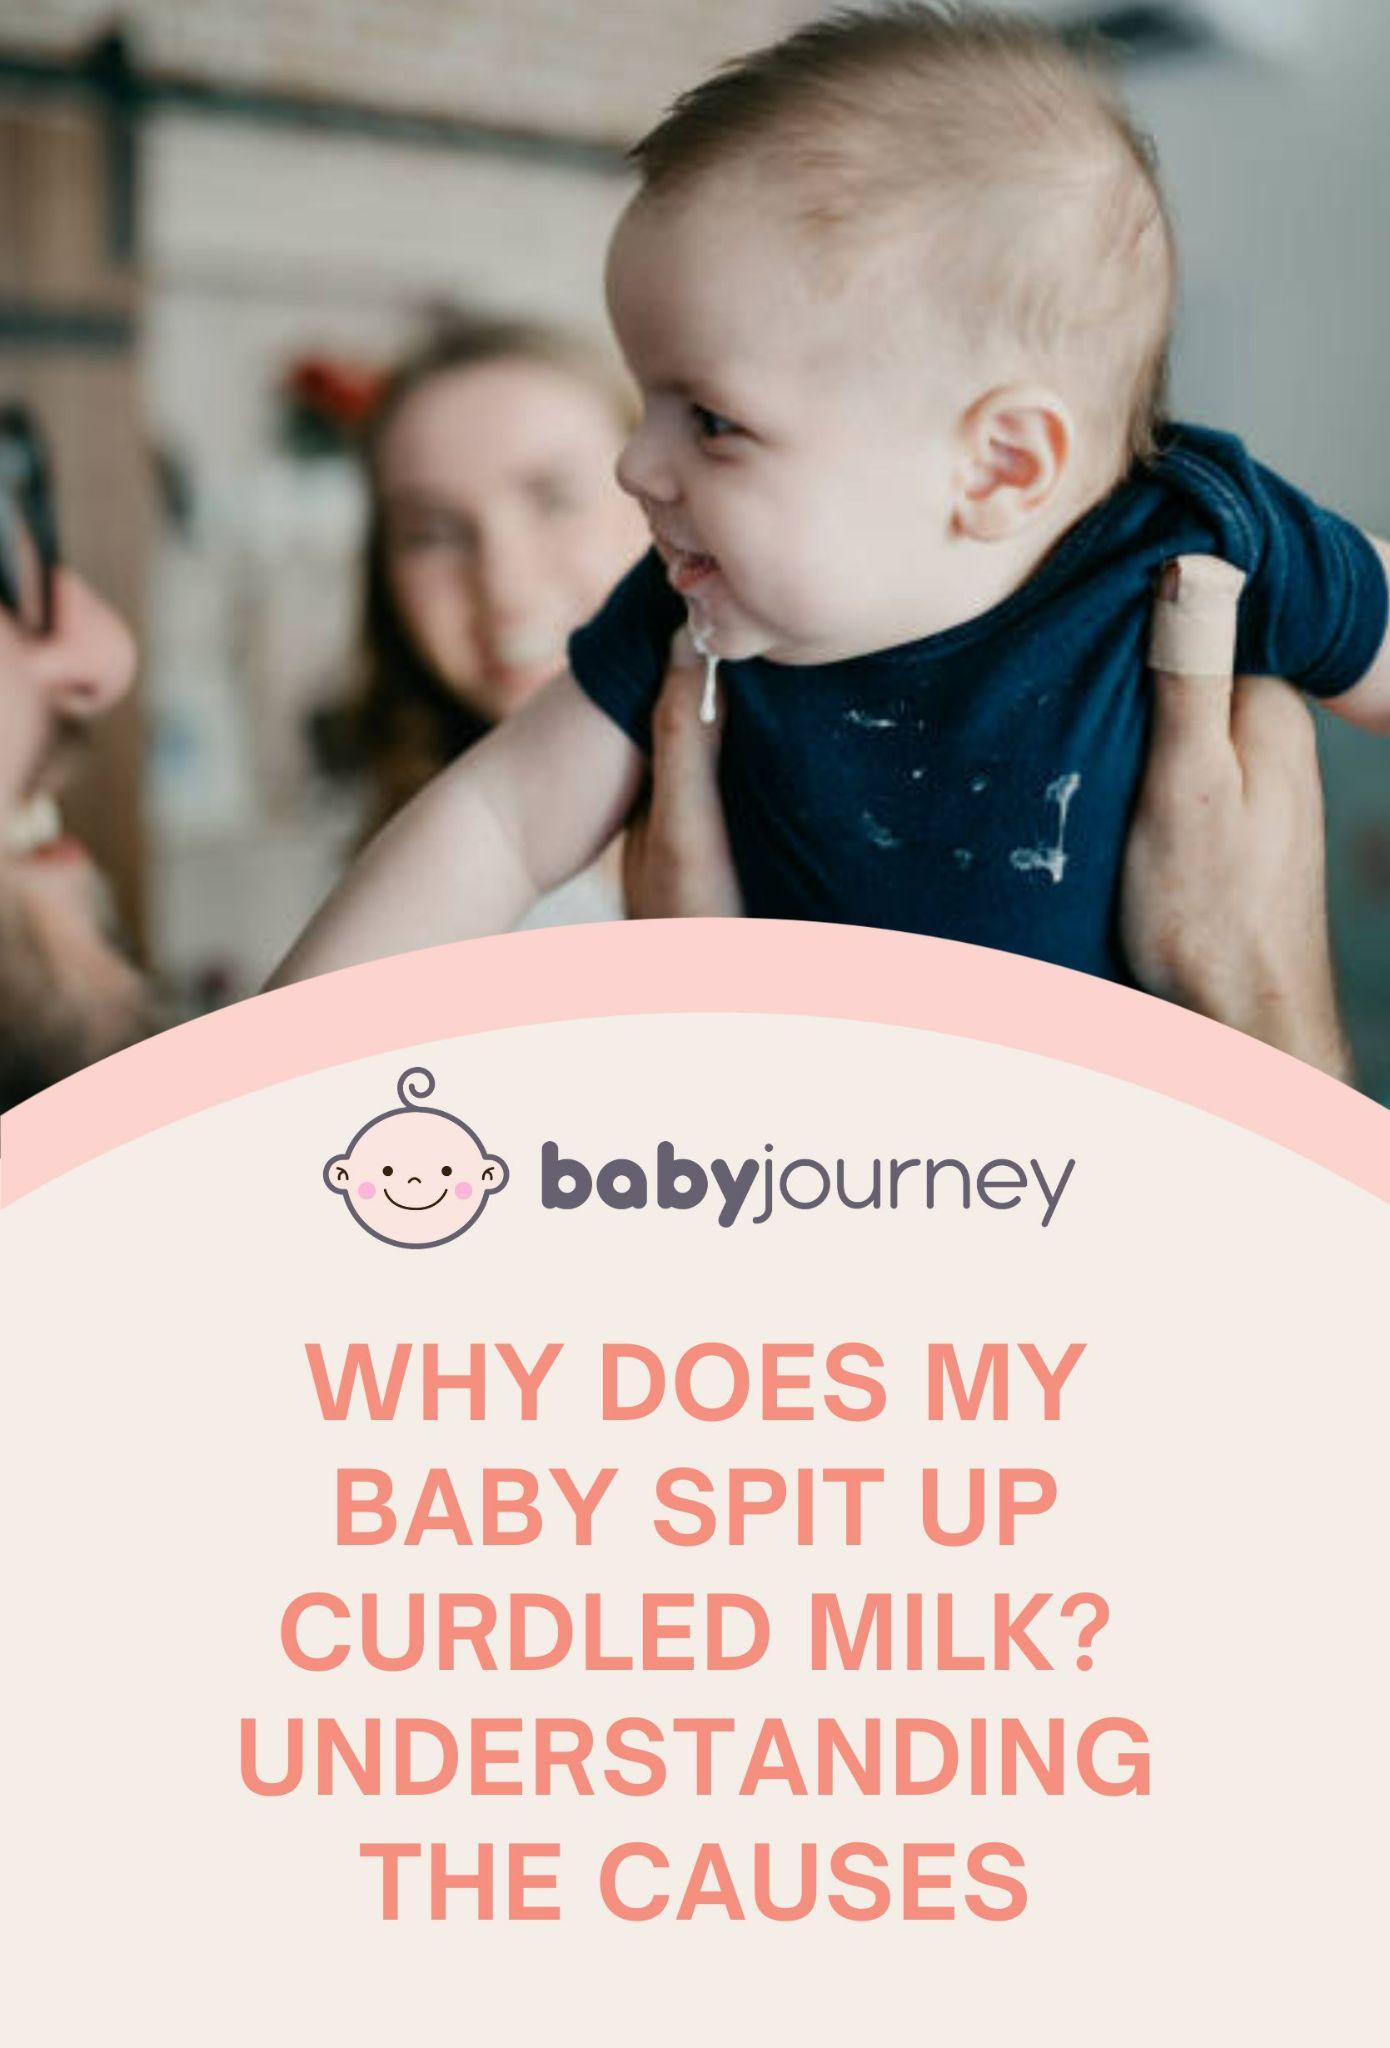 Why Does My Baby Spit Up Curdled Milk? Understanding the Causes Pinterest Image - Baby Journey  